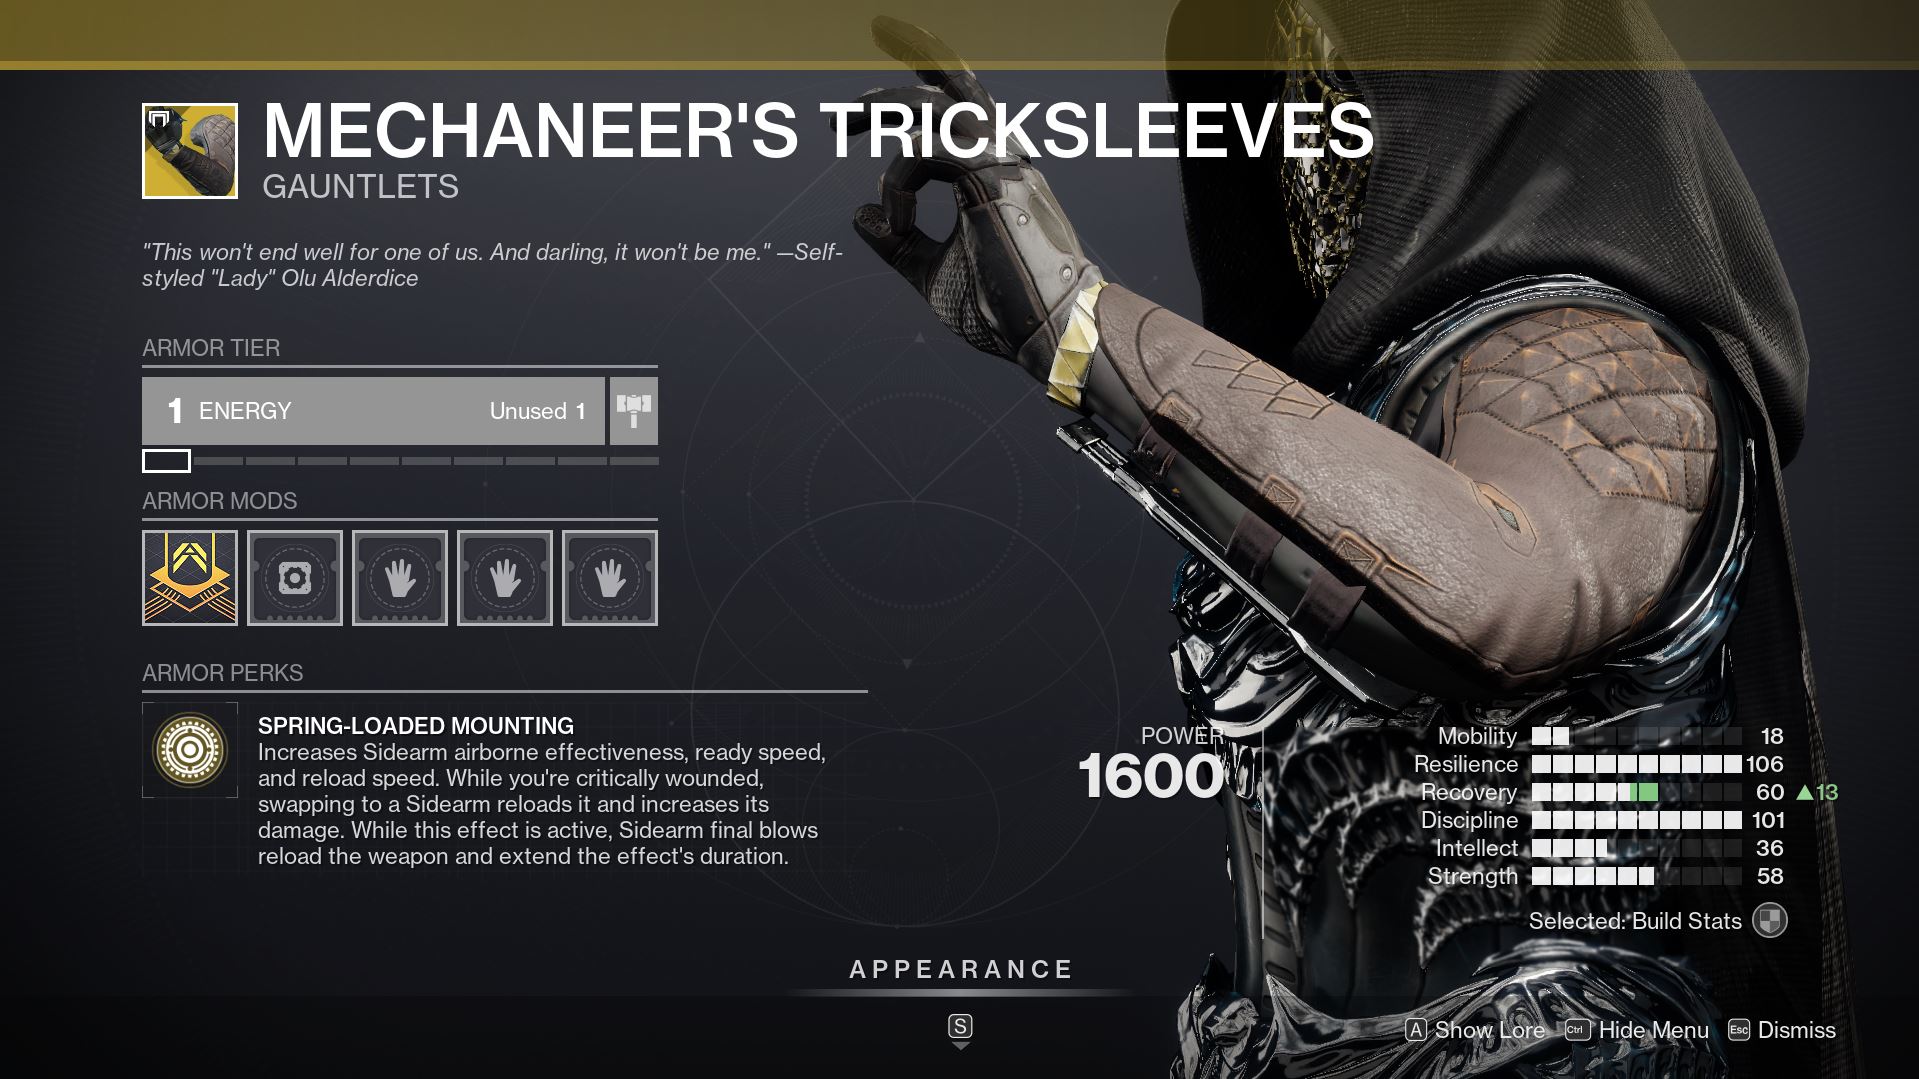 Destiny 2 Mechaneer's Tricksleeves Destiny 2 Has Seemingly Leaked New Exotic Armor Changes In-Game